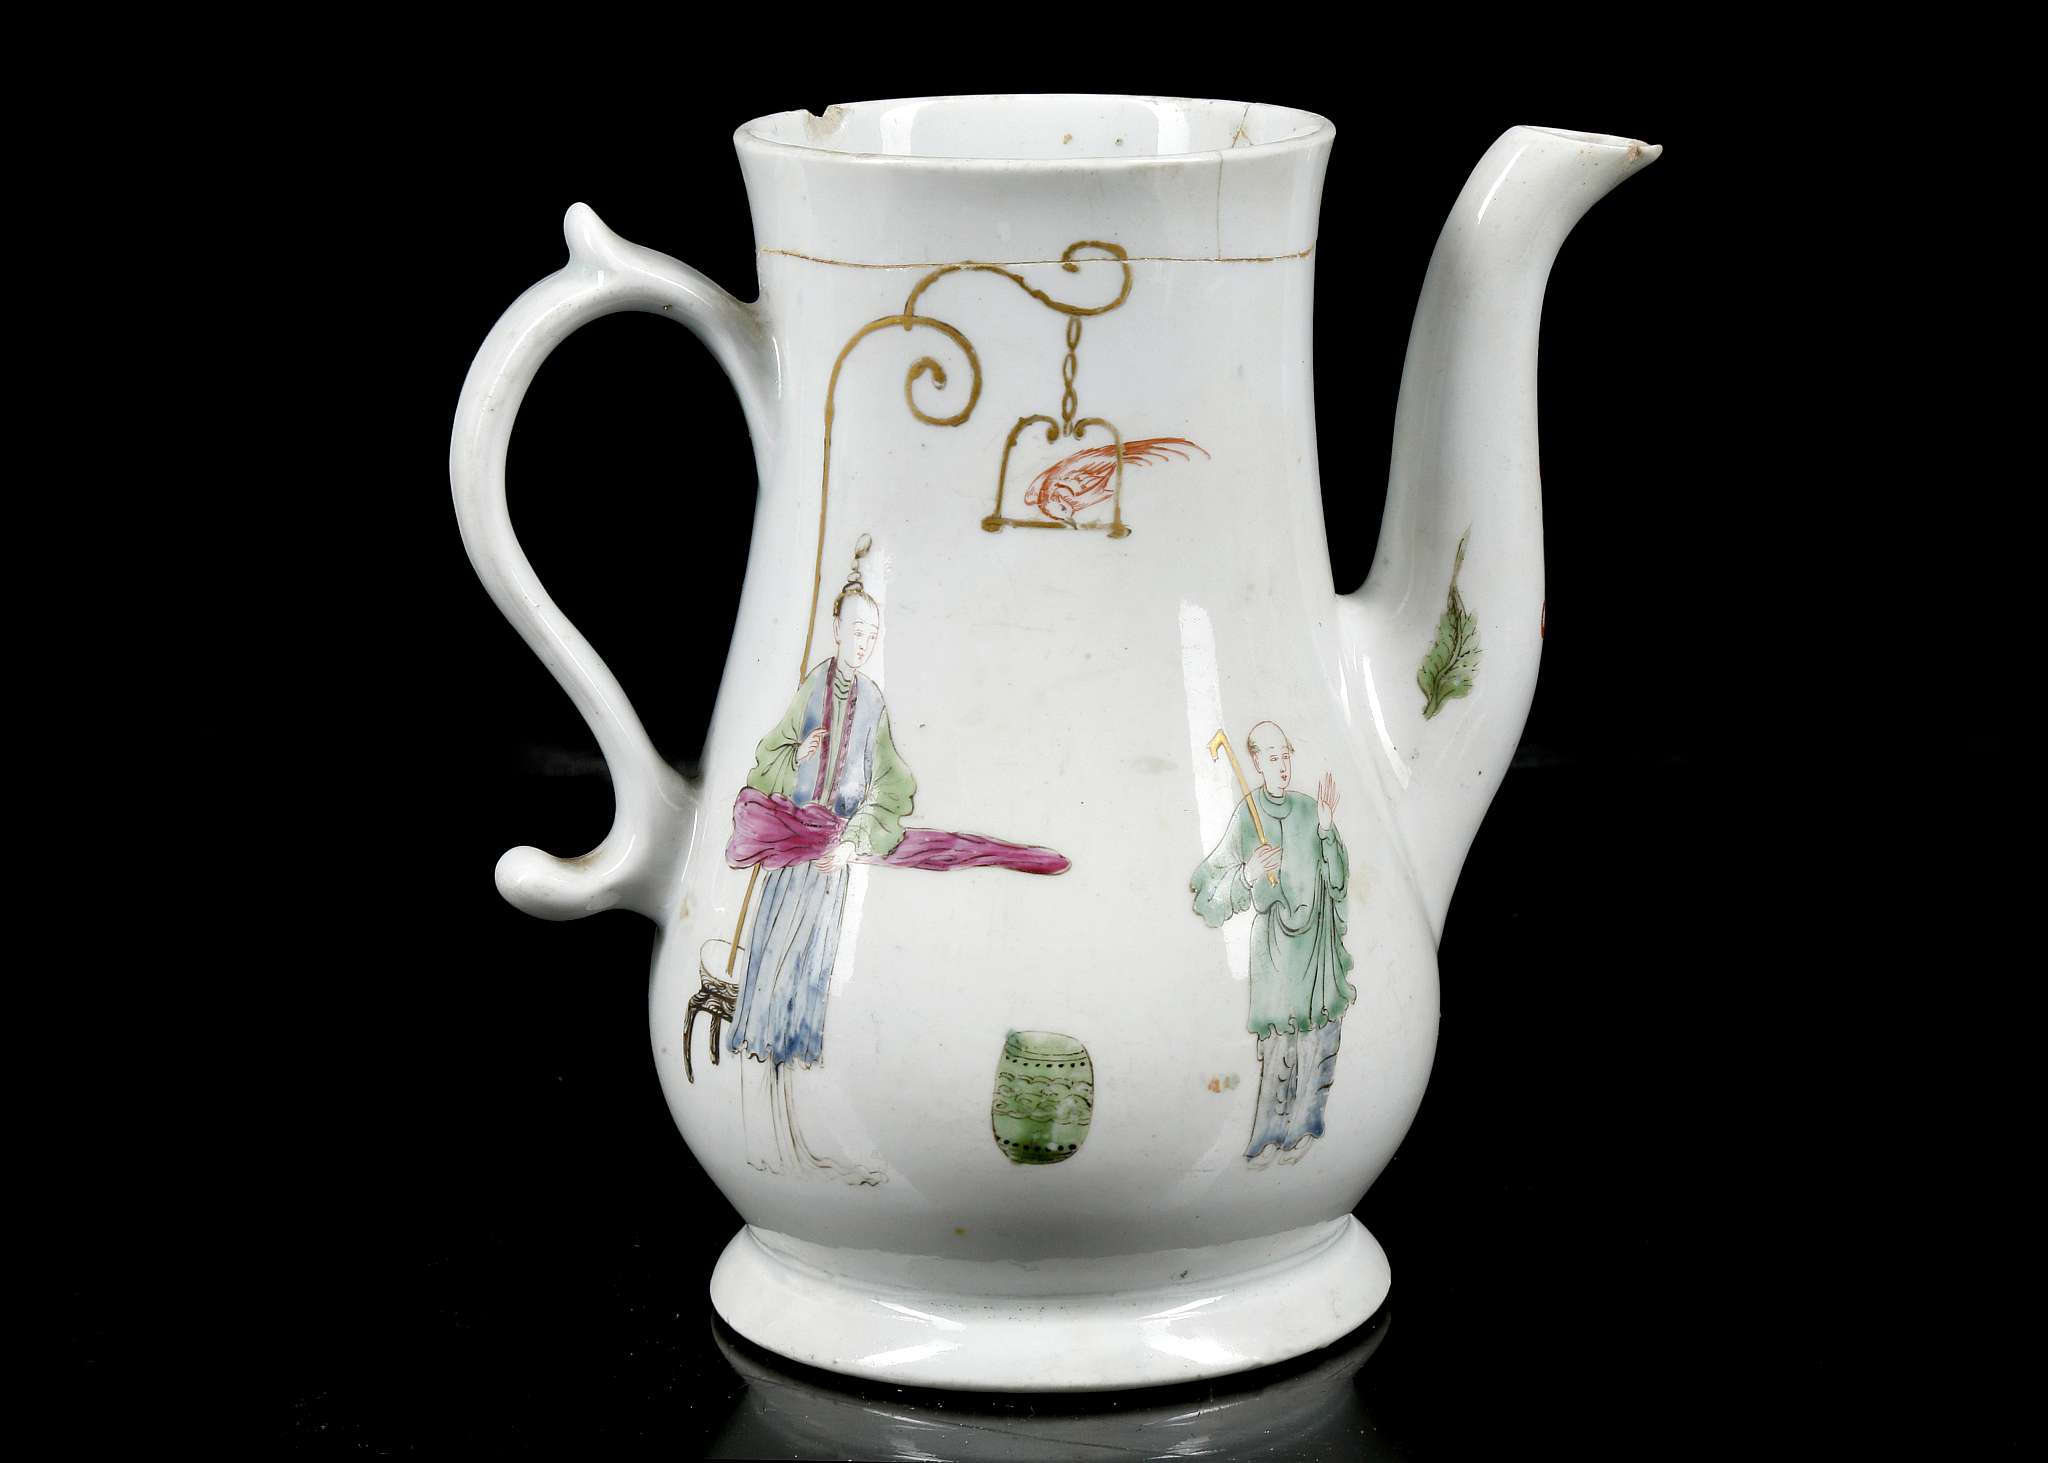 AN EARLY WORCESTER PORCELAIN COFFEE POT, circa 1753, of plain baluster shape on a neatly turned